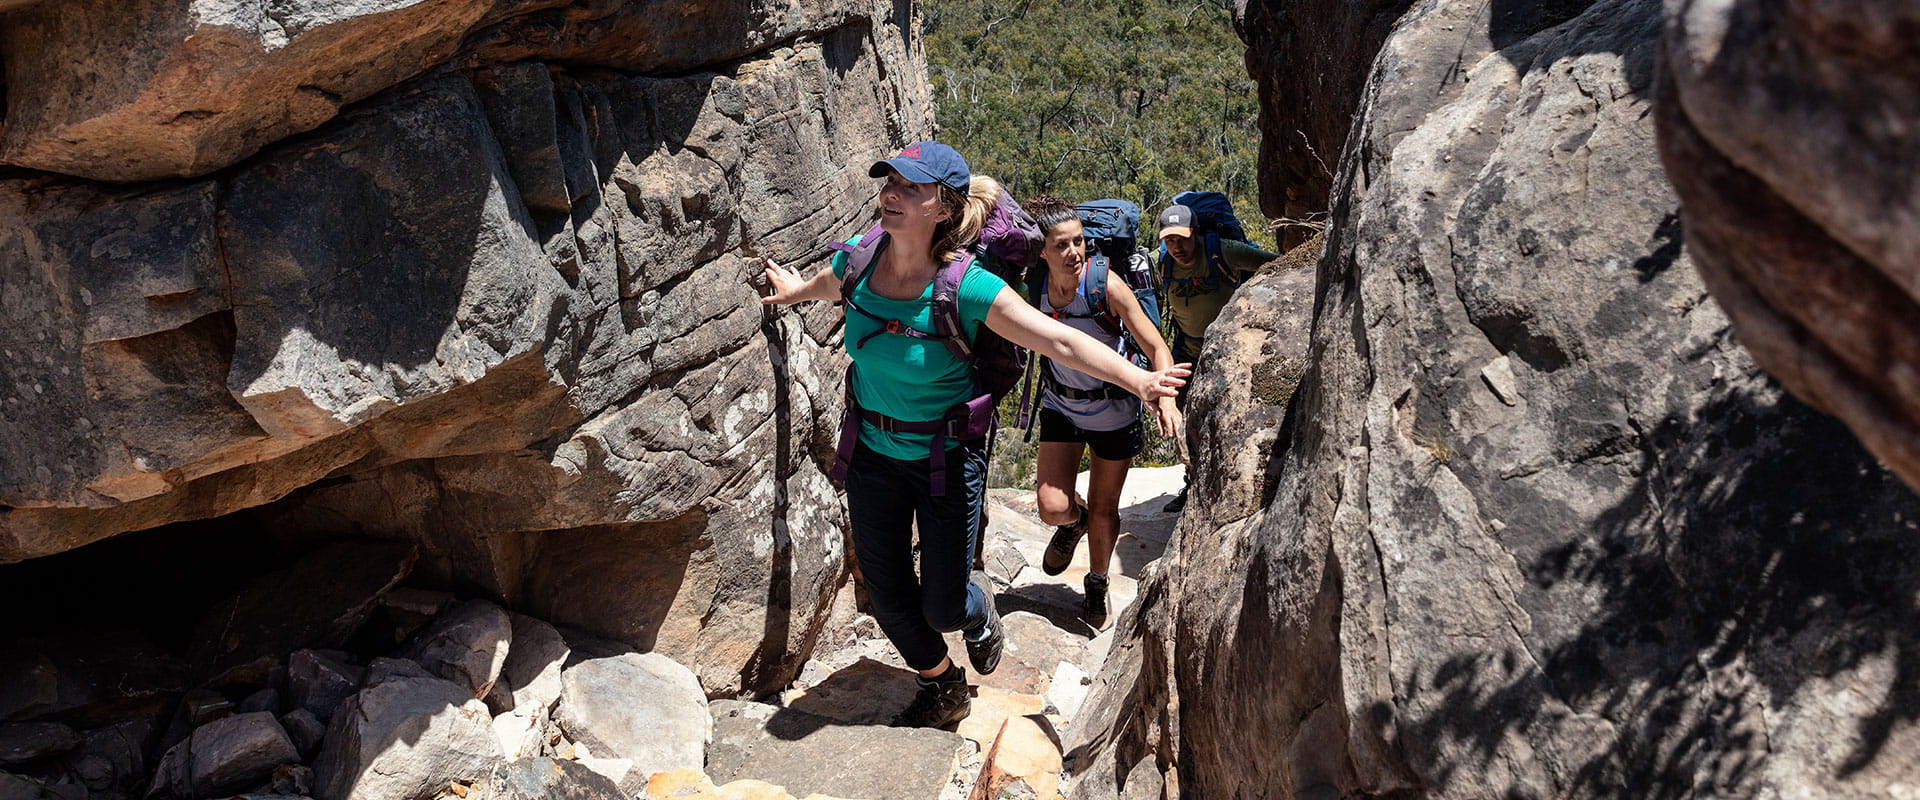 A group of hikers walk through a narrow trail with large stone on either side and a mountainous view in the background 